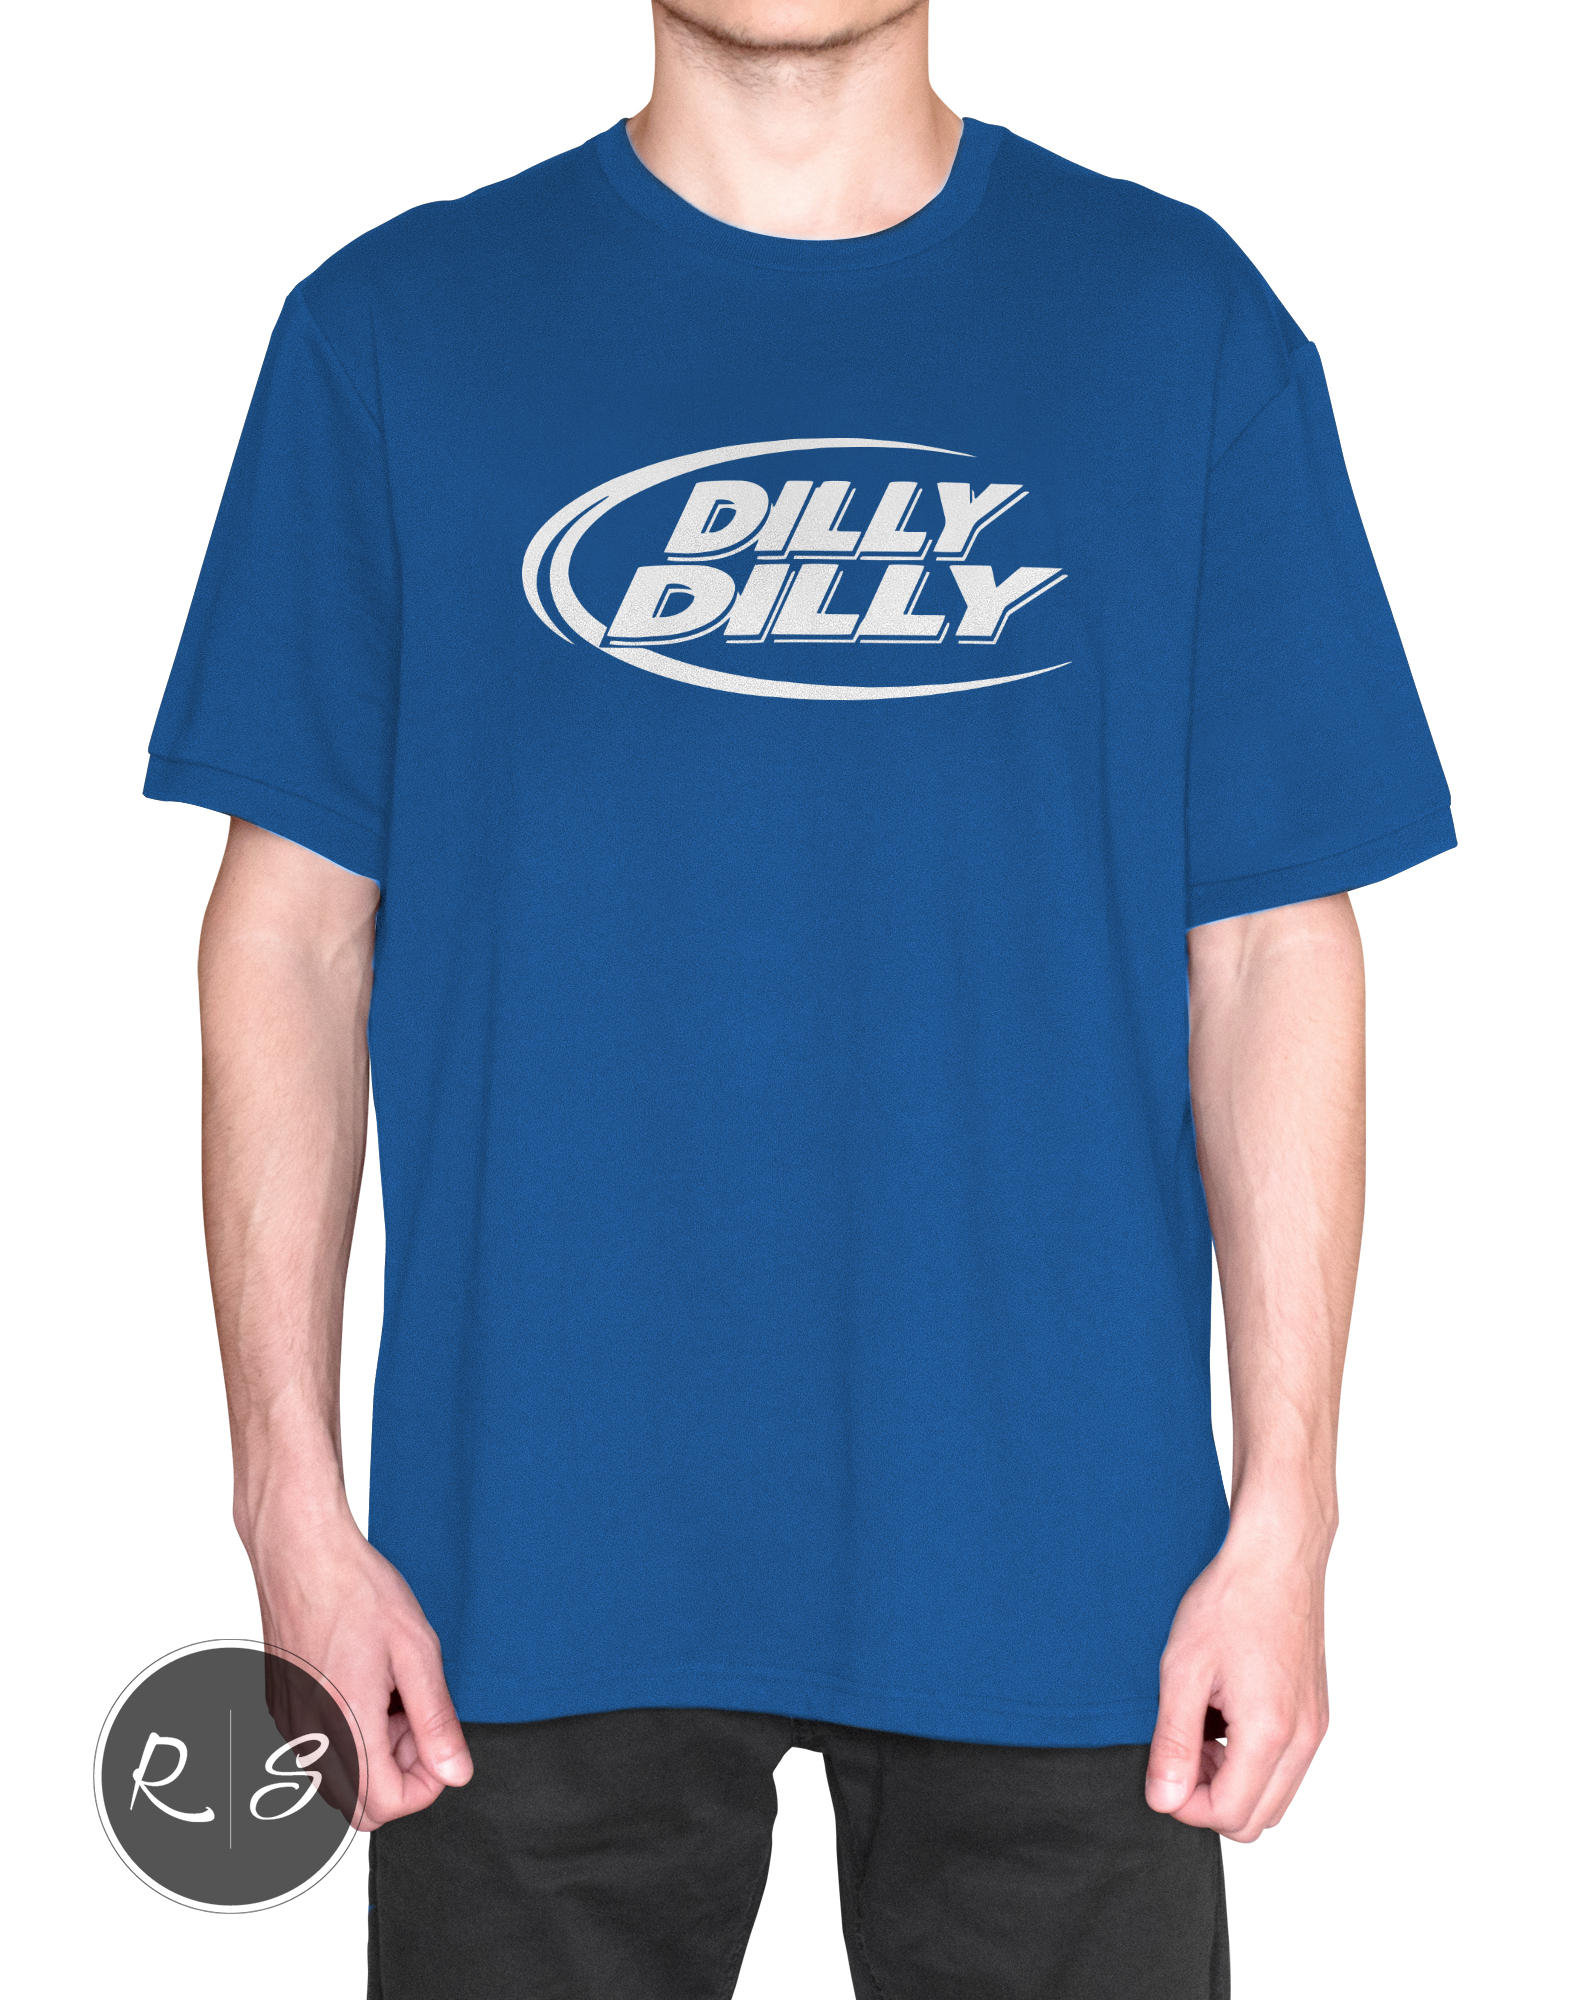 dilly dilly shirt bud light